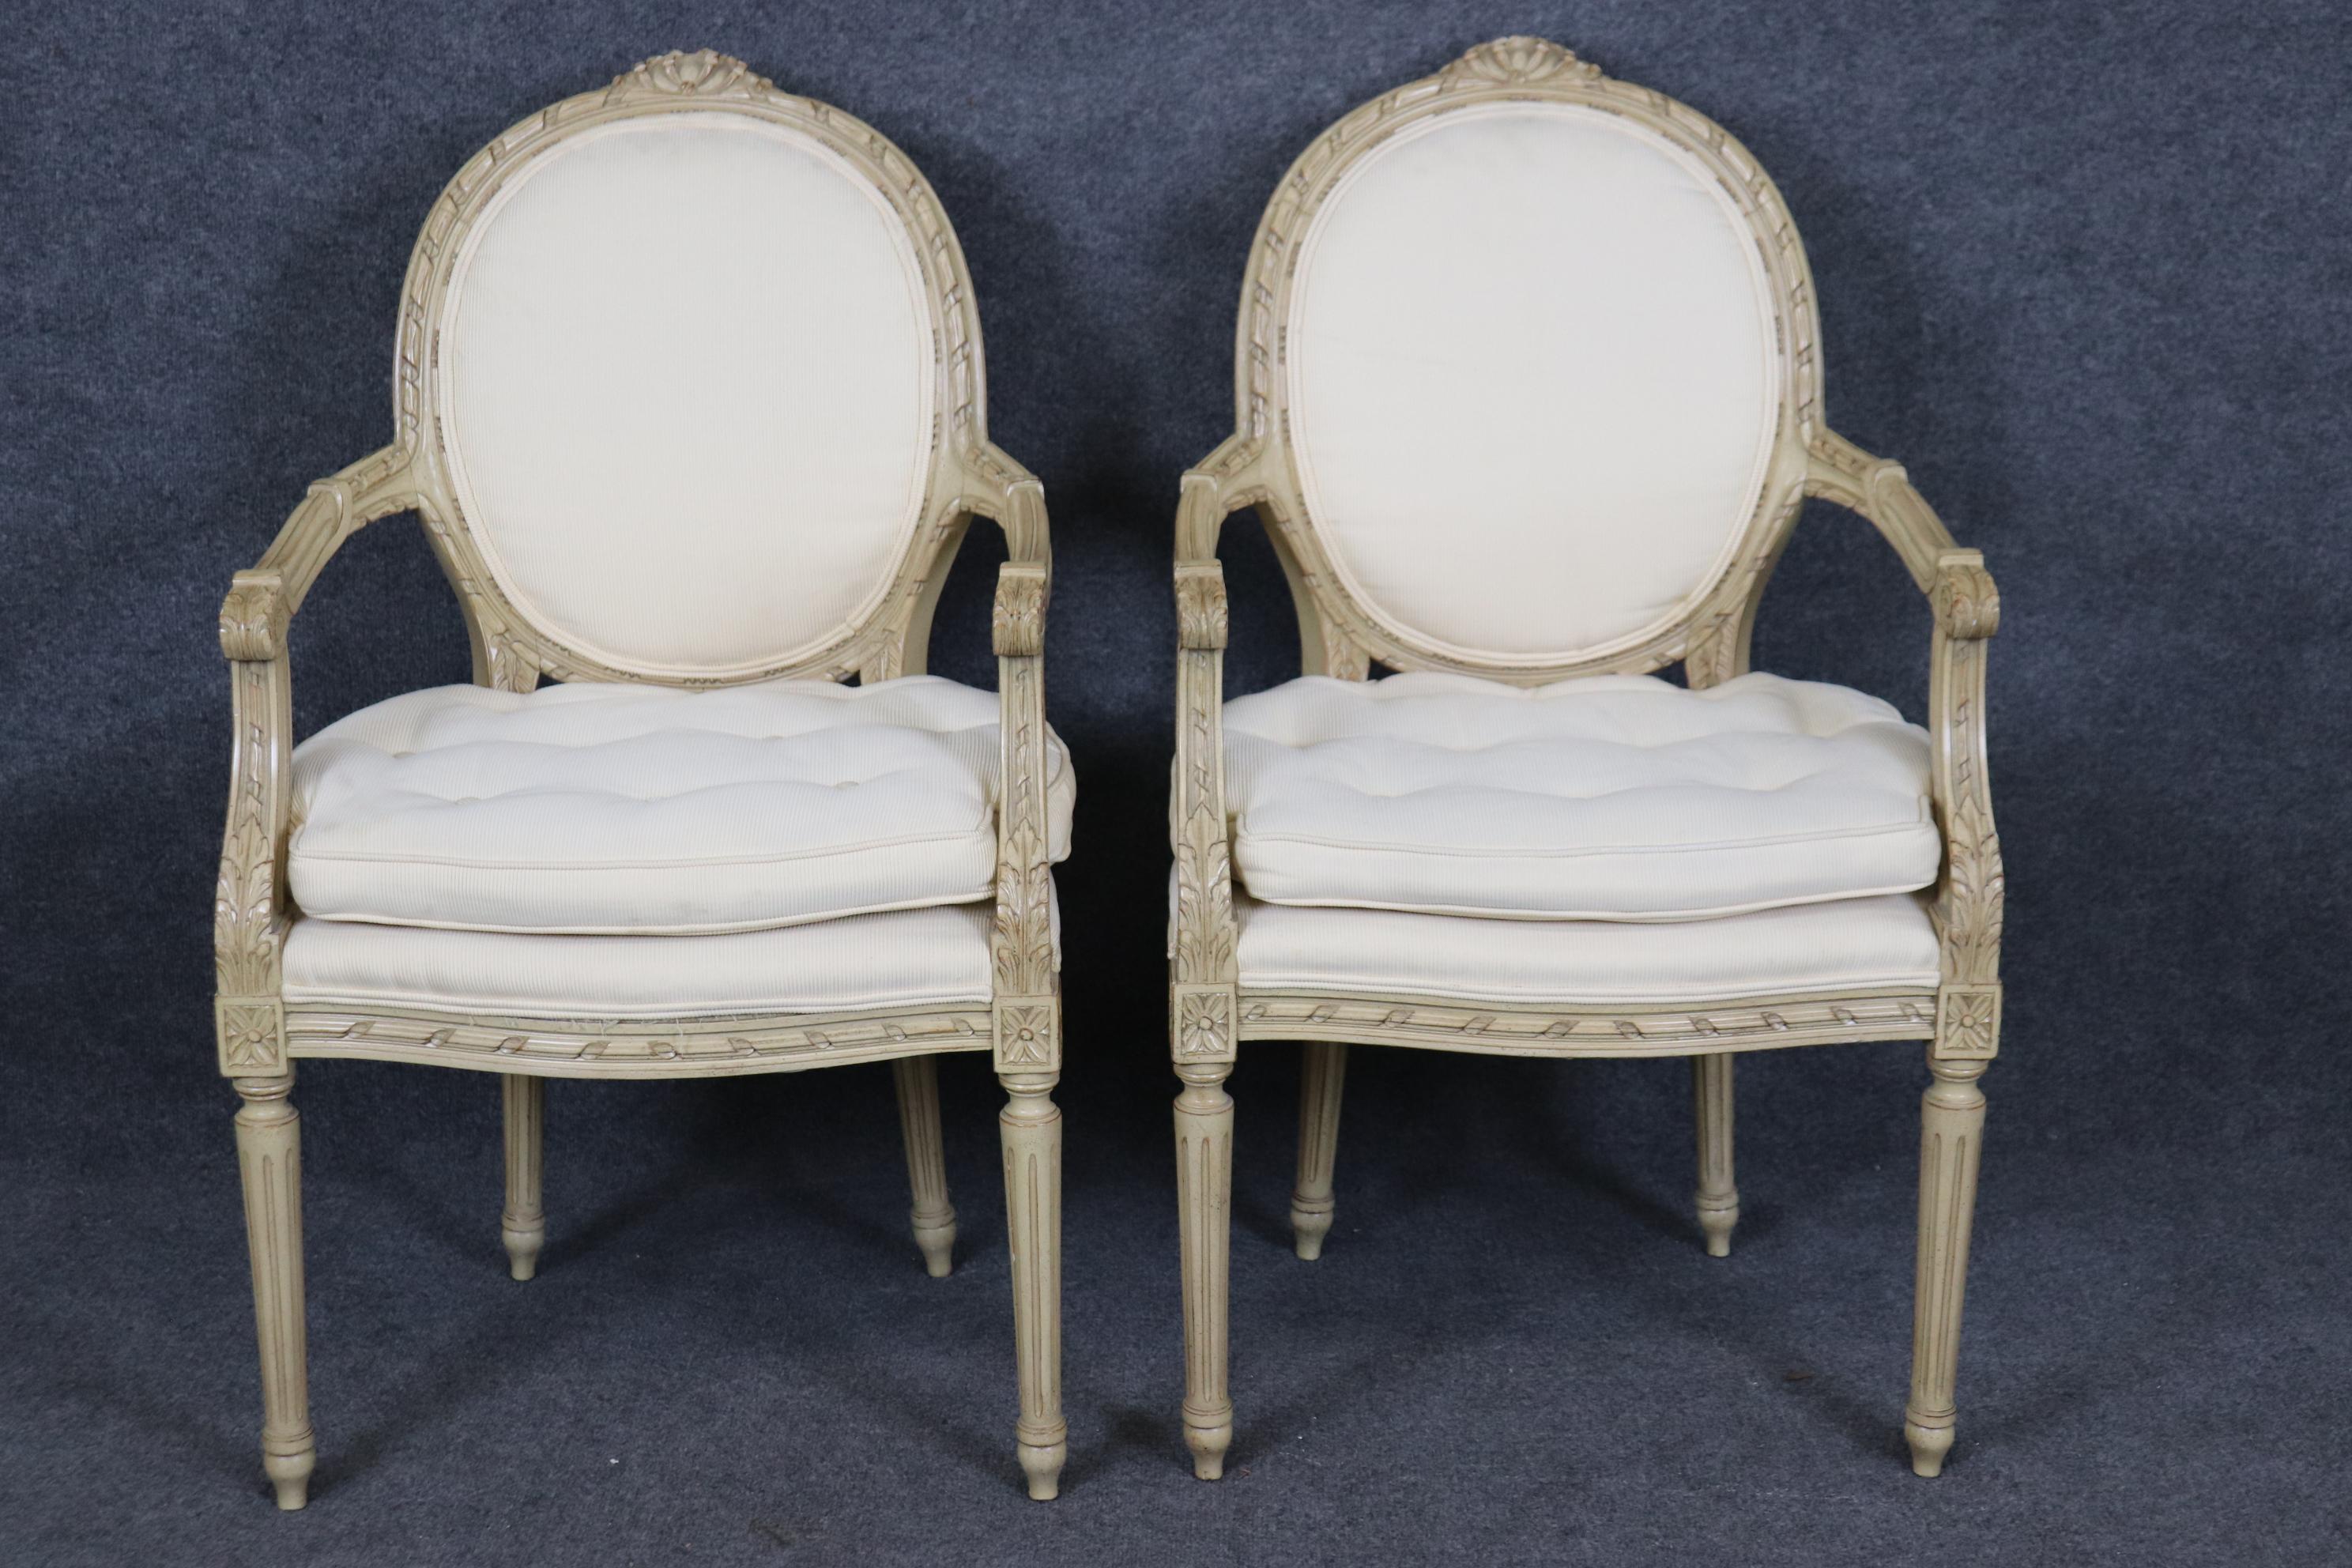 This is a gorgeous pair of hand-carved frames made in Europe, either France or Italy. They are finished in a hand-rubbed intentionally destressed creme painted finish. The corduroy style velour is in relatively good condition and does have a visible